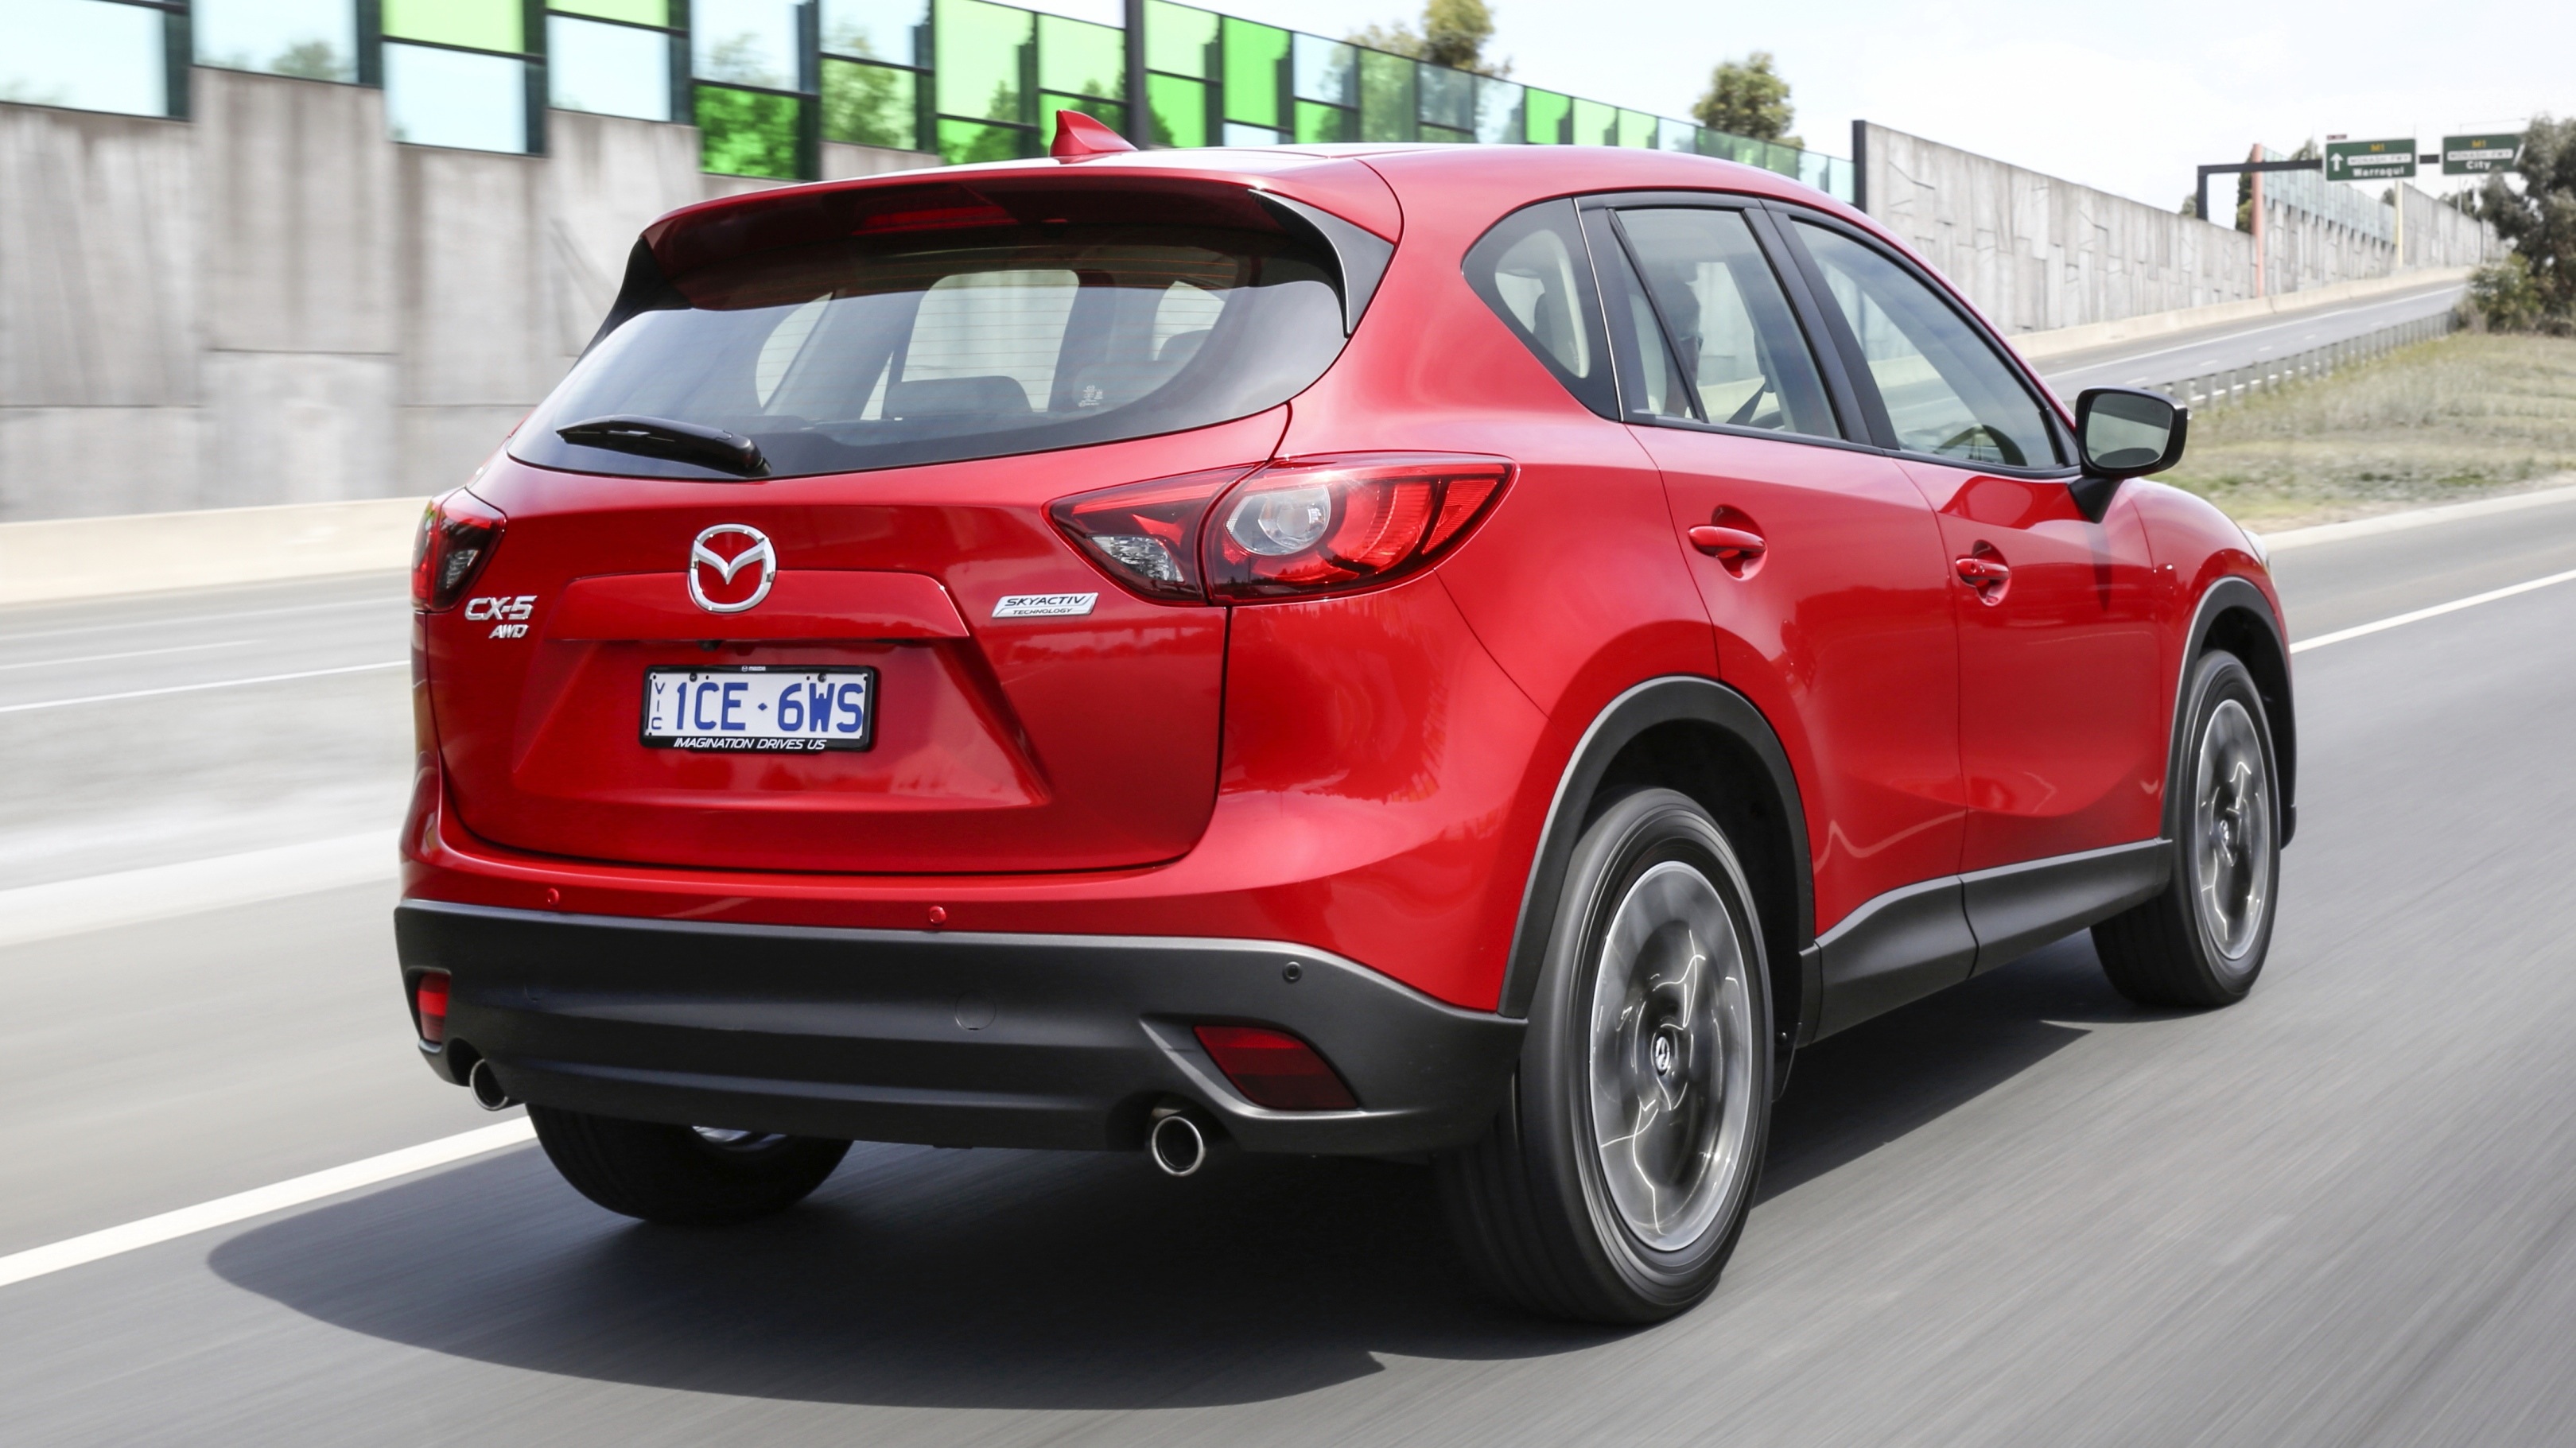 2015 Mazda CX-5 : Pricing and specifications - photos | CarAdvice